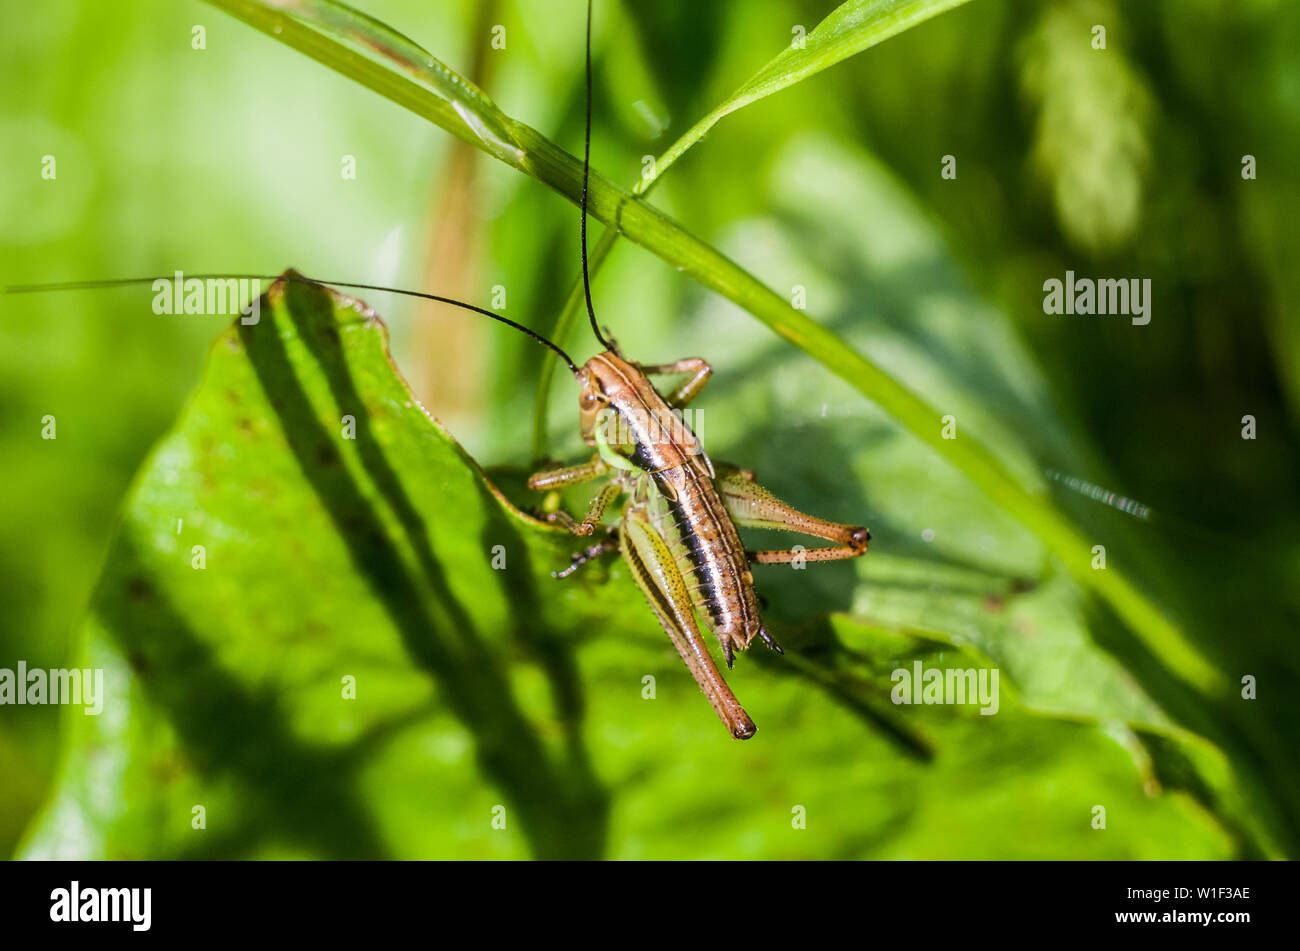 Grasshopper on a green blurred background. Photo of an insect in a natural lashcape. Stock Photo